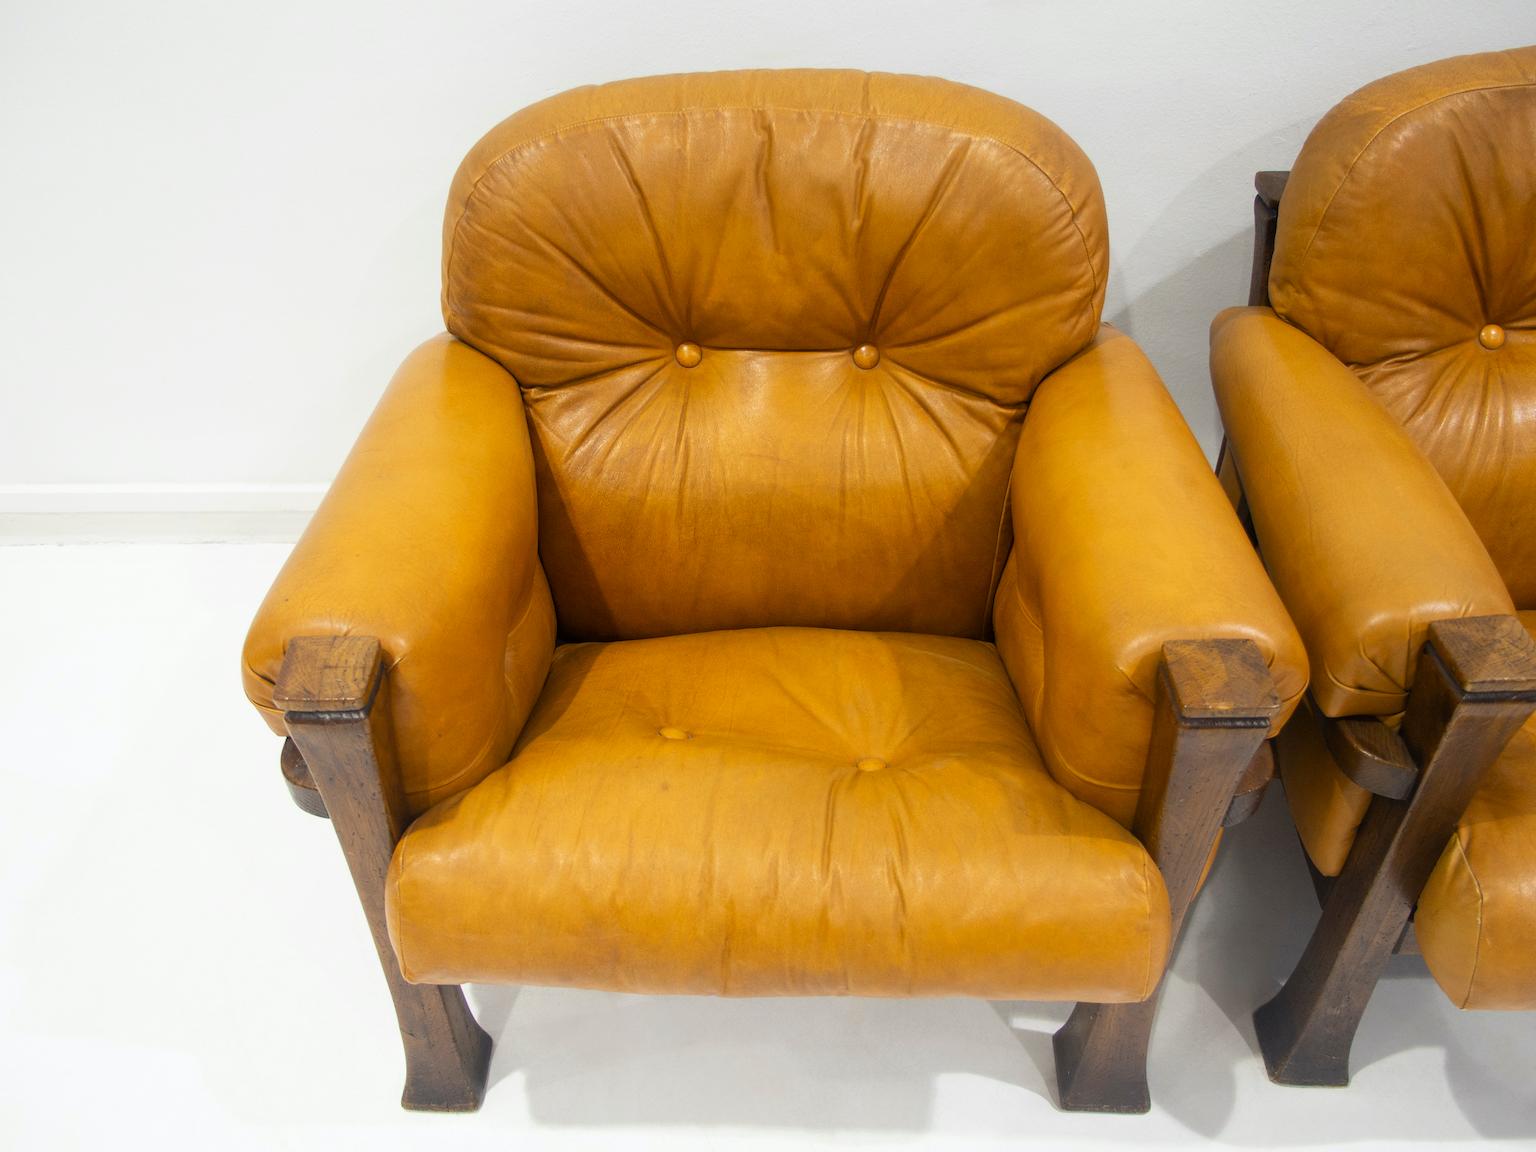 Brazilian Pair of Leather and Hardwood Armchairs Attributed to Percival Lafer